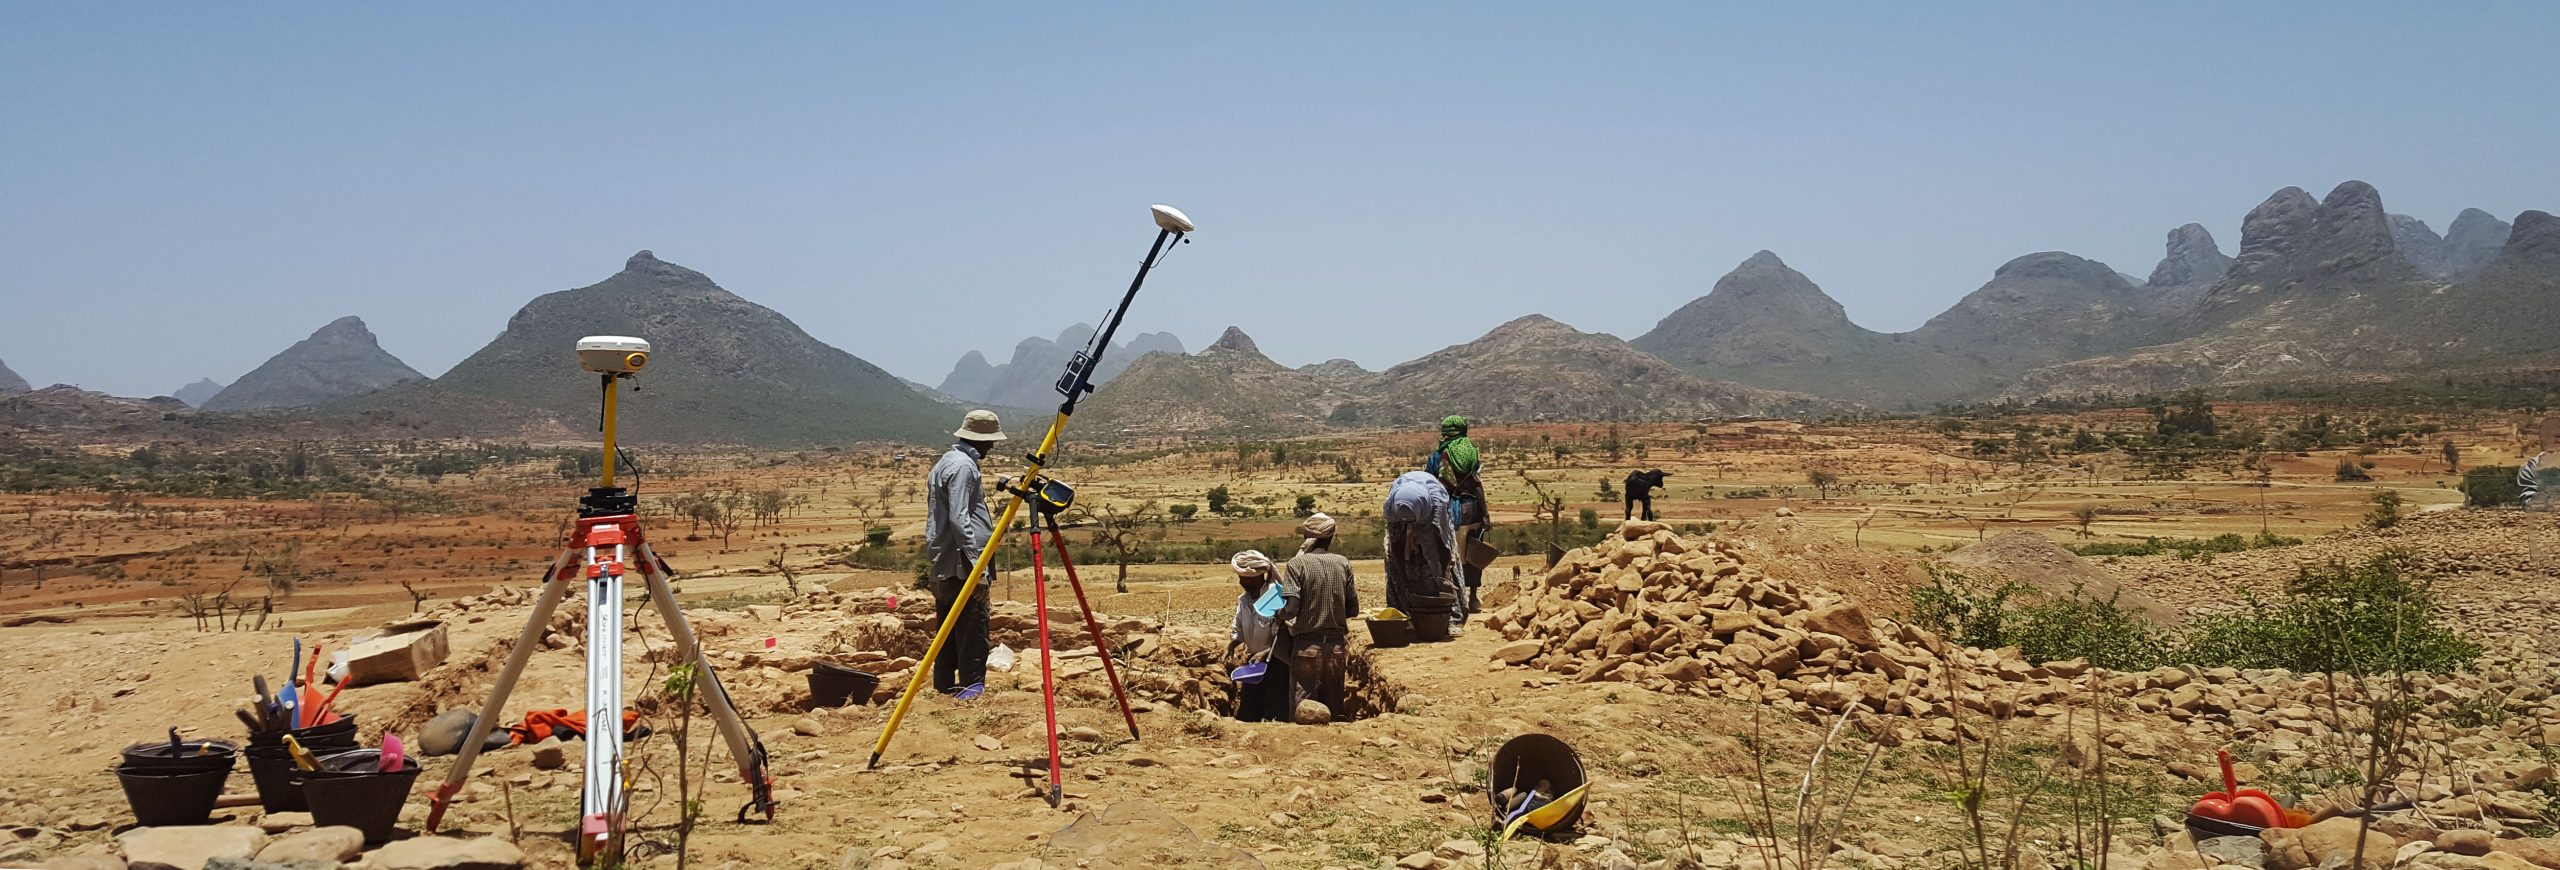 The Southern Red Sea Archaeological Histories (SRSAH) Project is a collaborative research effort involving Ethiopian, American, Canadian, French, and Italian students and scholars investigating the ancient Horn of Africa.